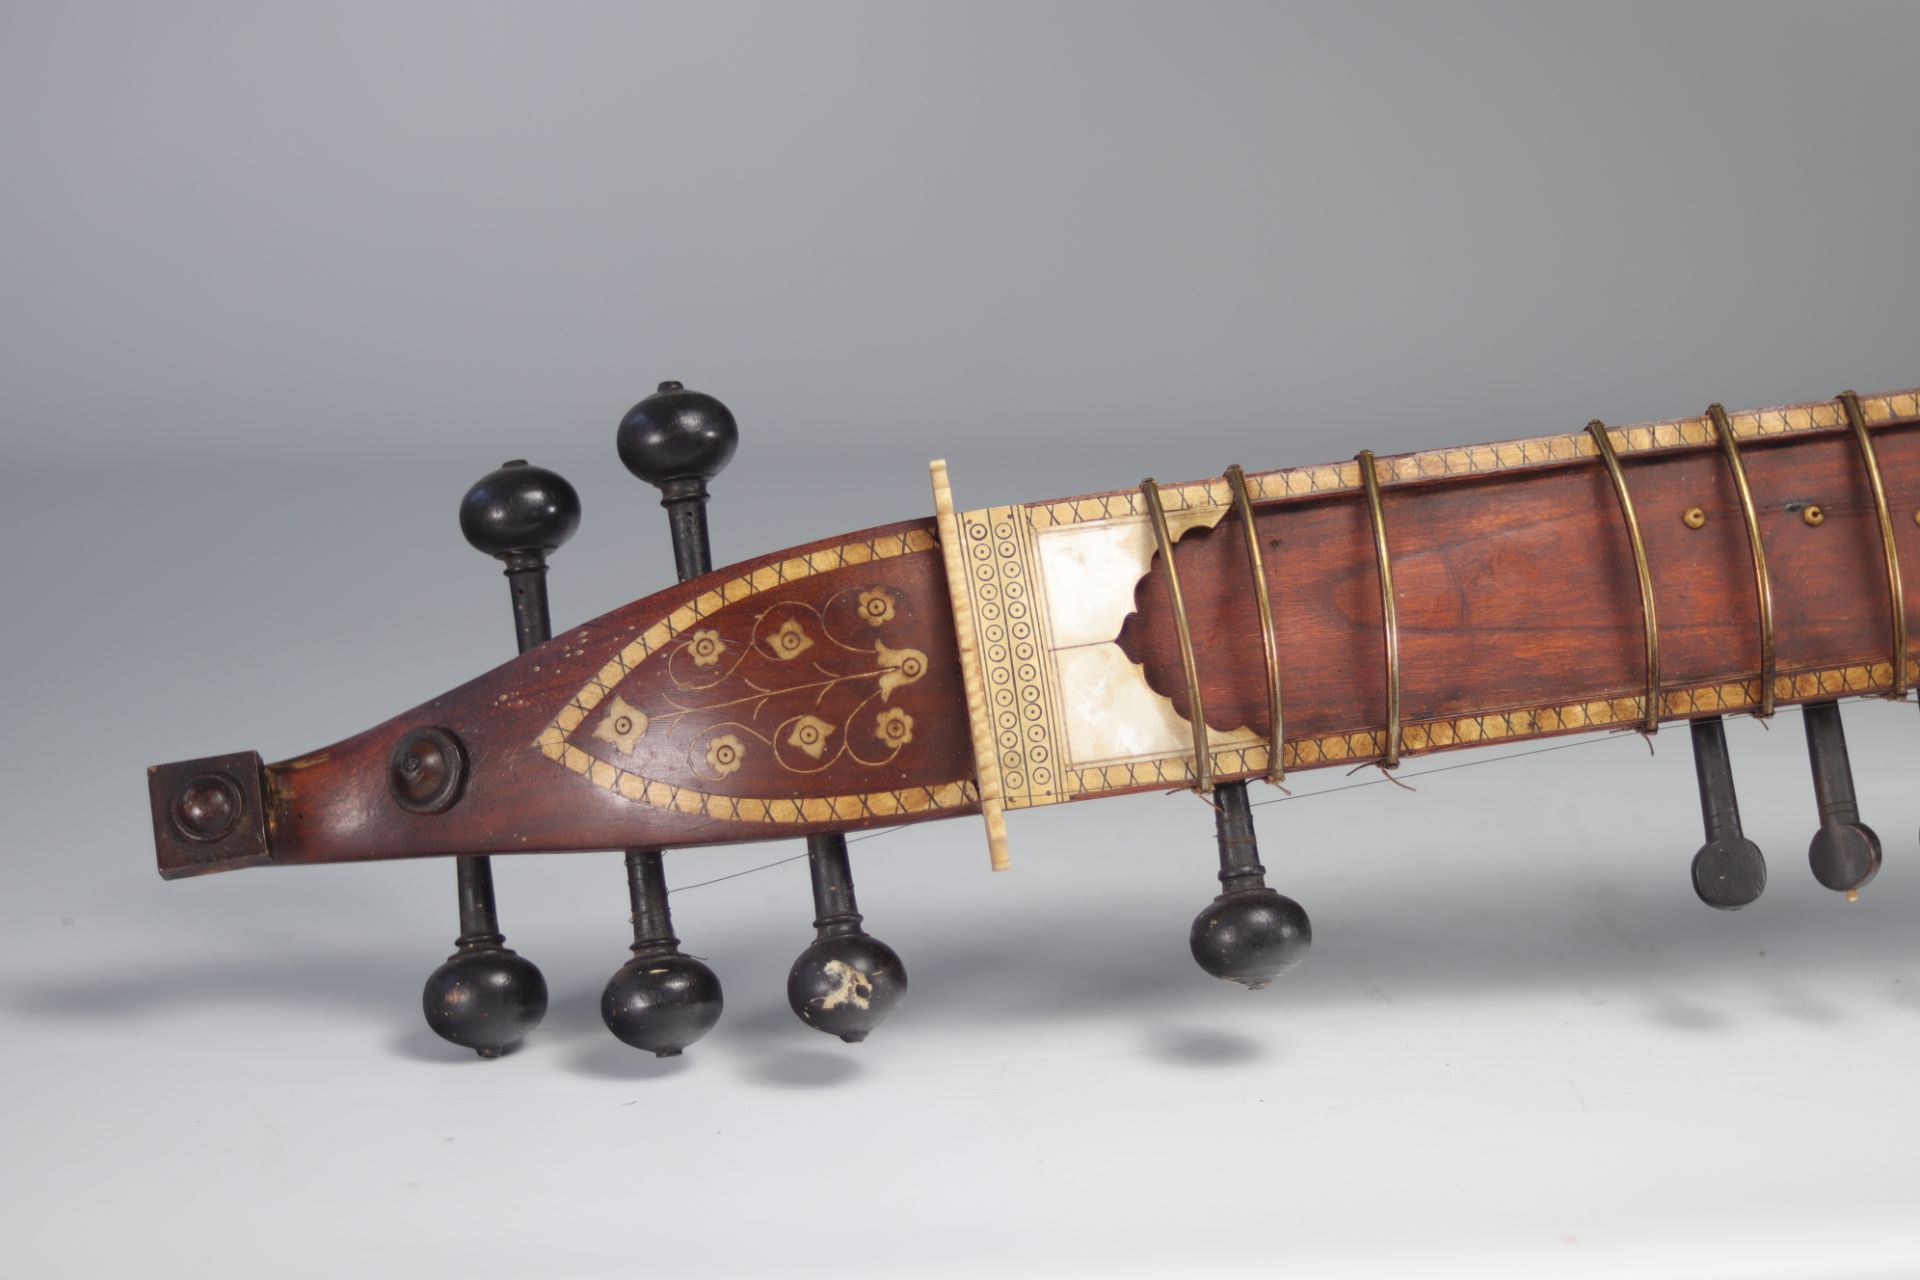 Stringed instrument called "La Vina" from India - Image 3 of 4